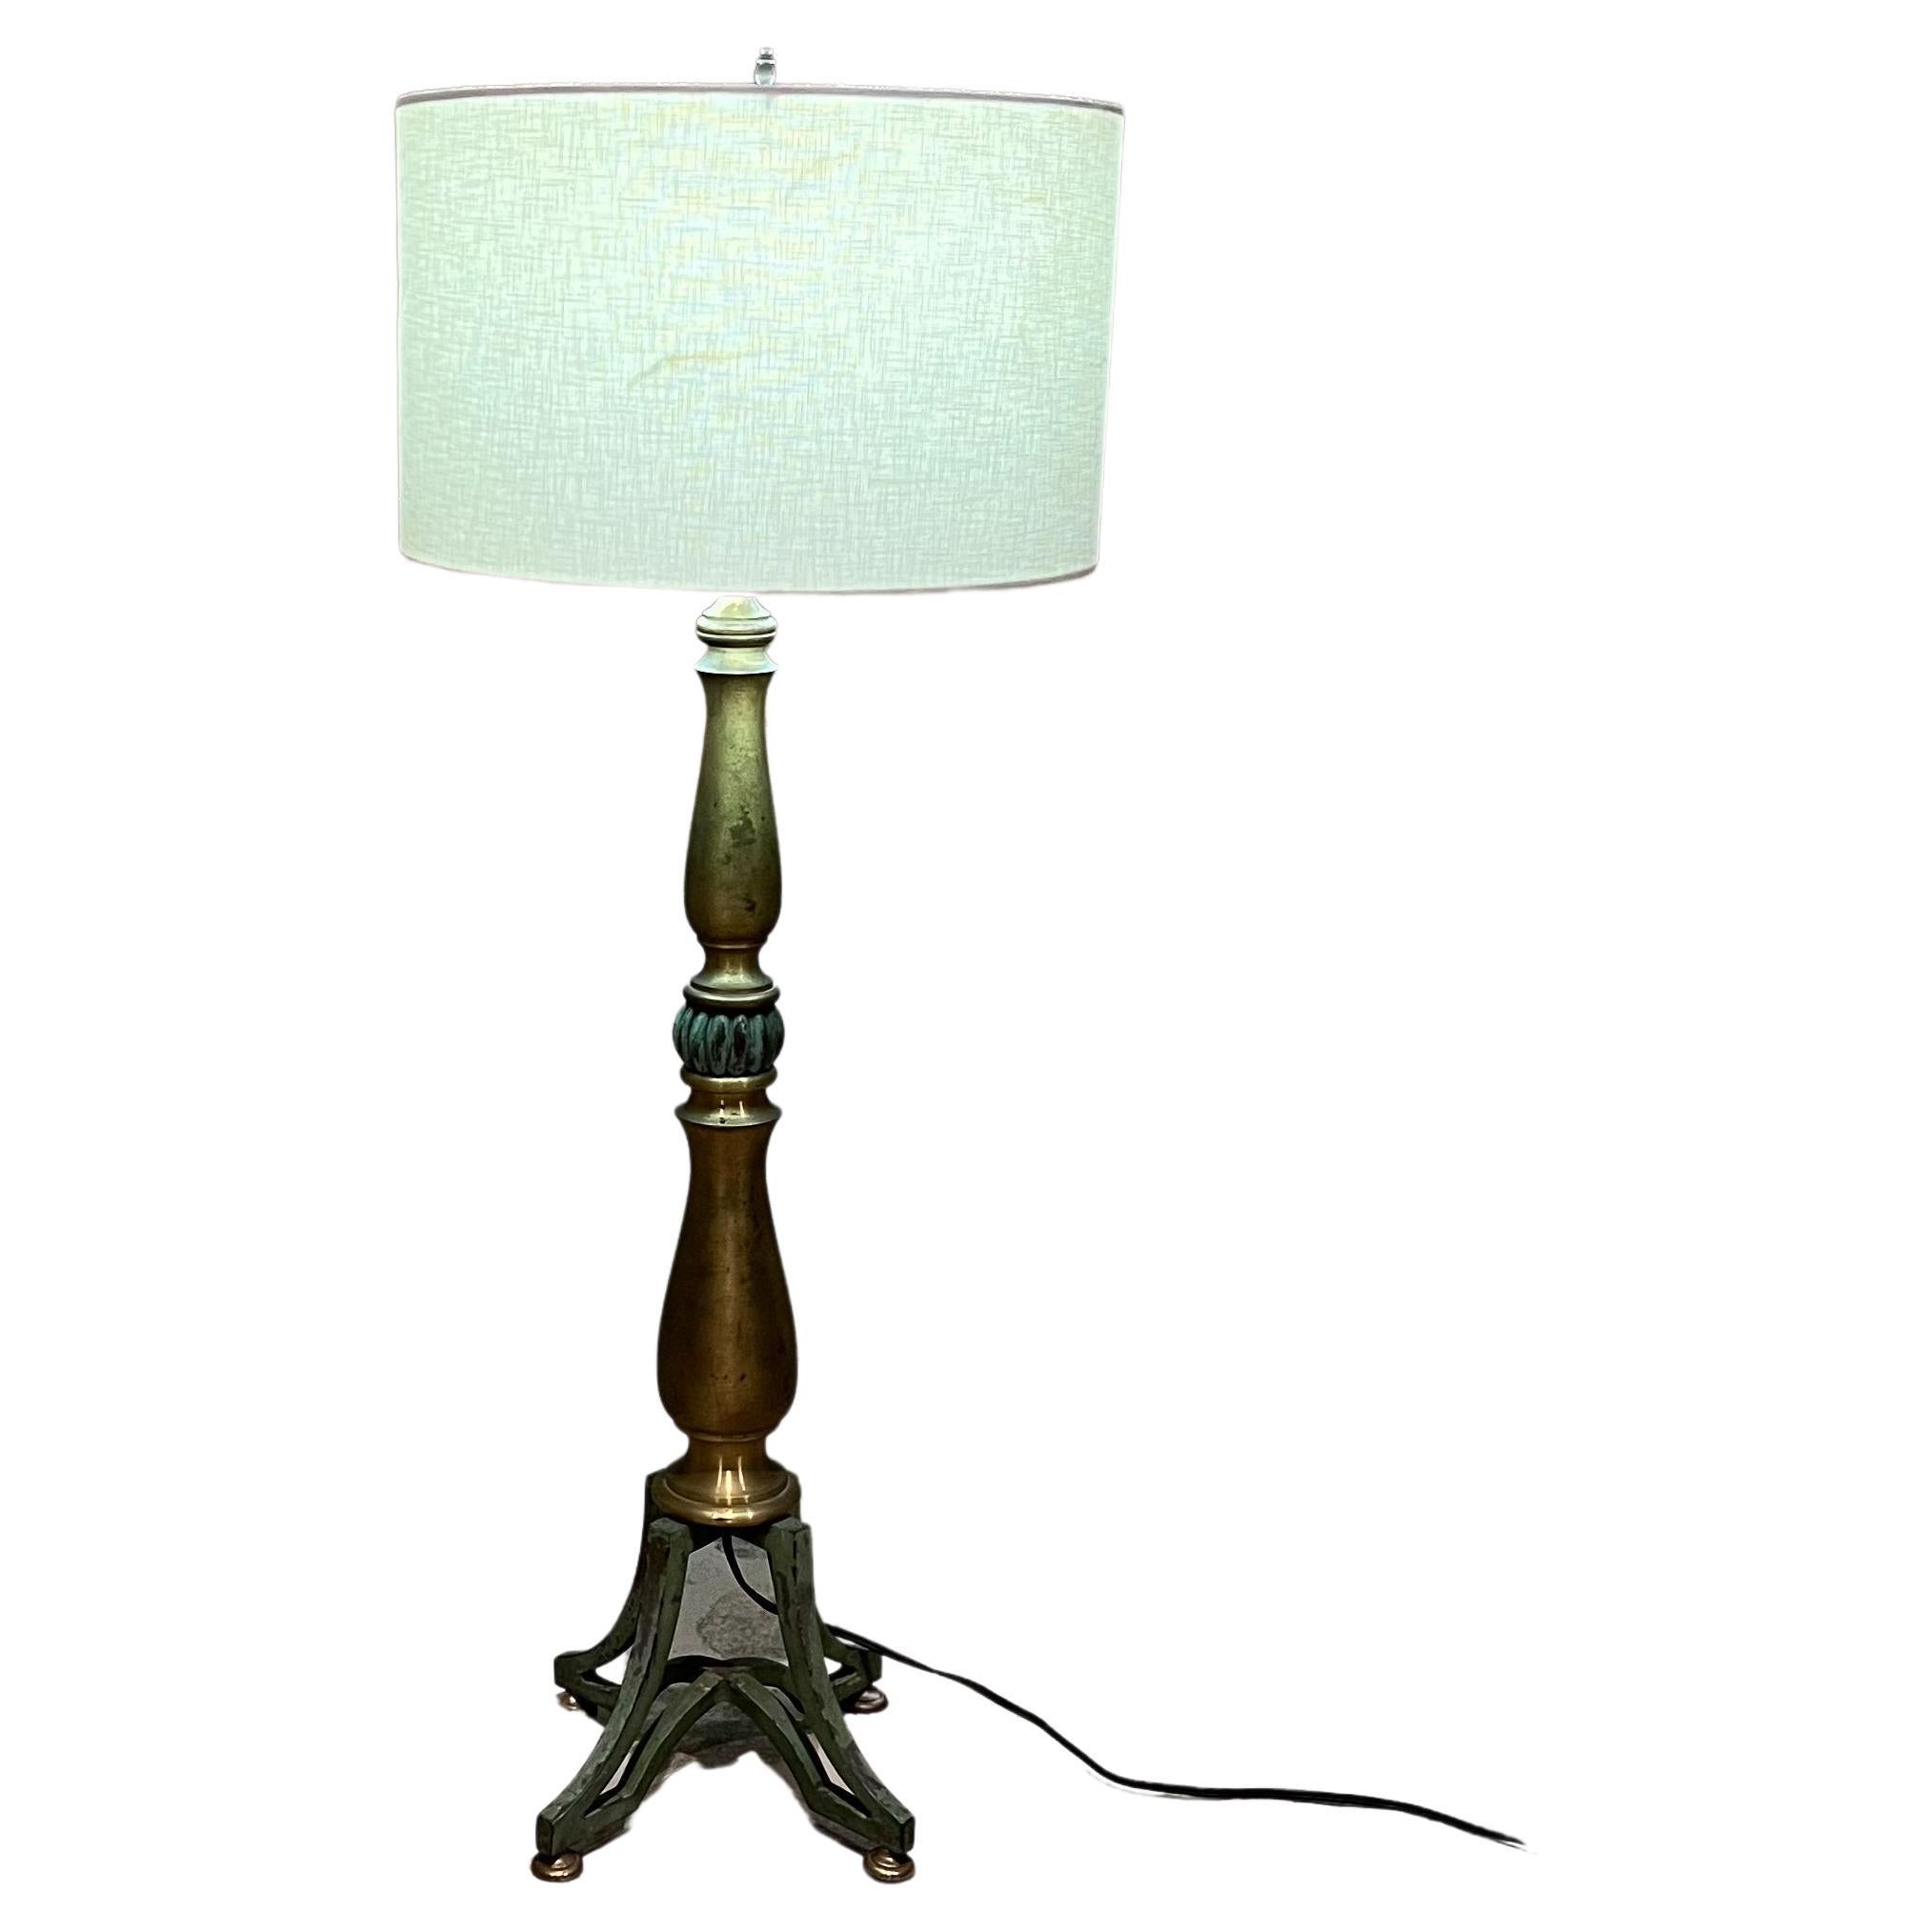 Table Lamp
Sophisticated tall table lamp made with patinated forged Iron brass accents
Unmarked by designer Arturo Pani Mexico circa 1950s.
Lamp shade is not included.
34.25 tall x 9.5 x 9.5
Original Vintage Unrestored preowned condition. Lamp has